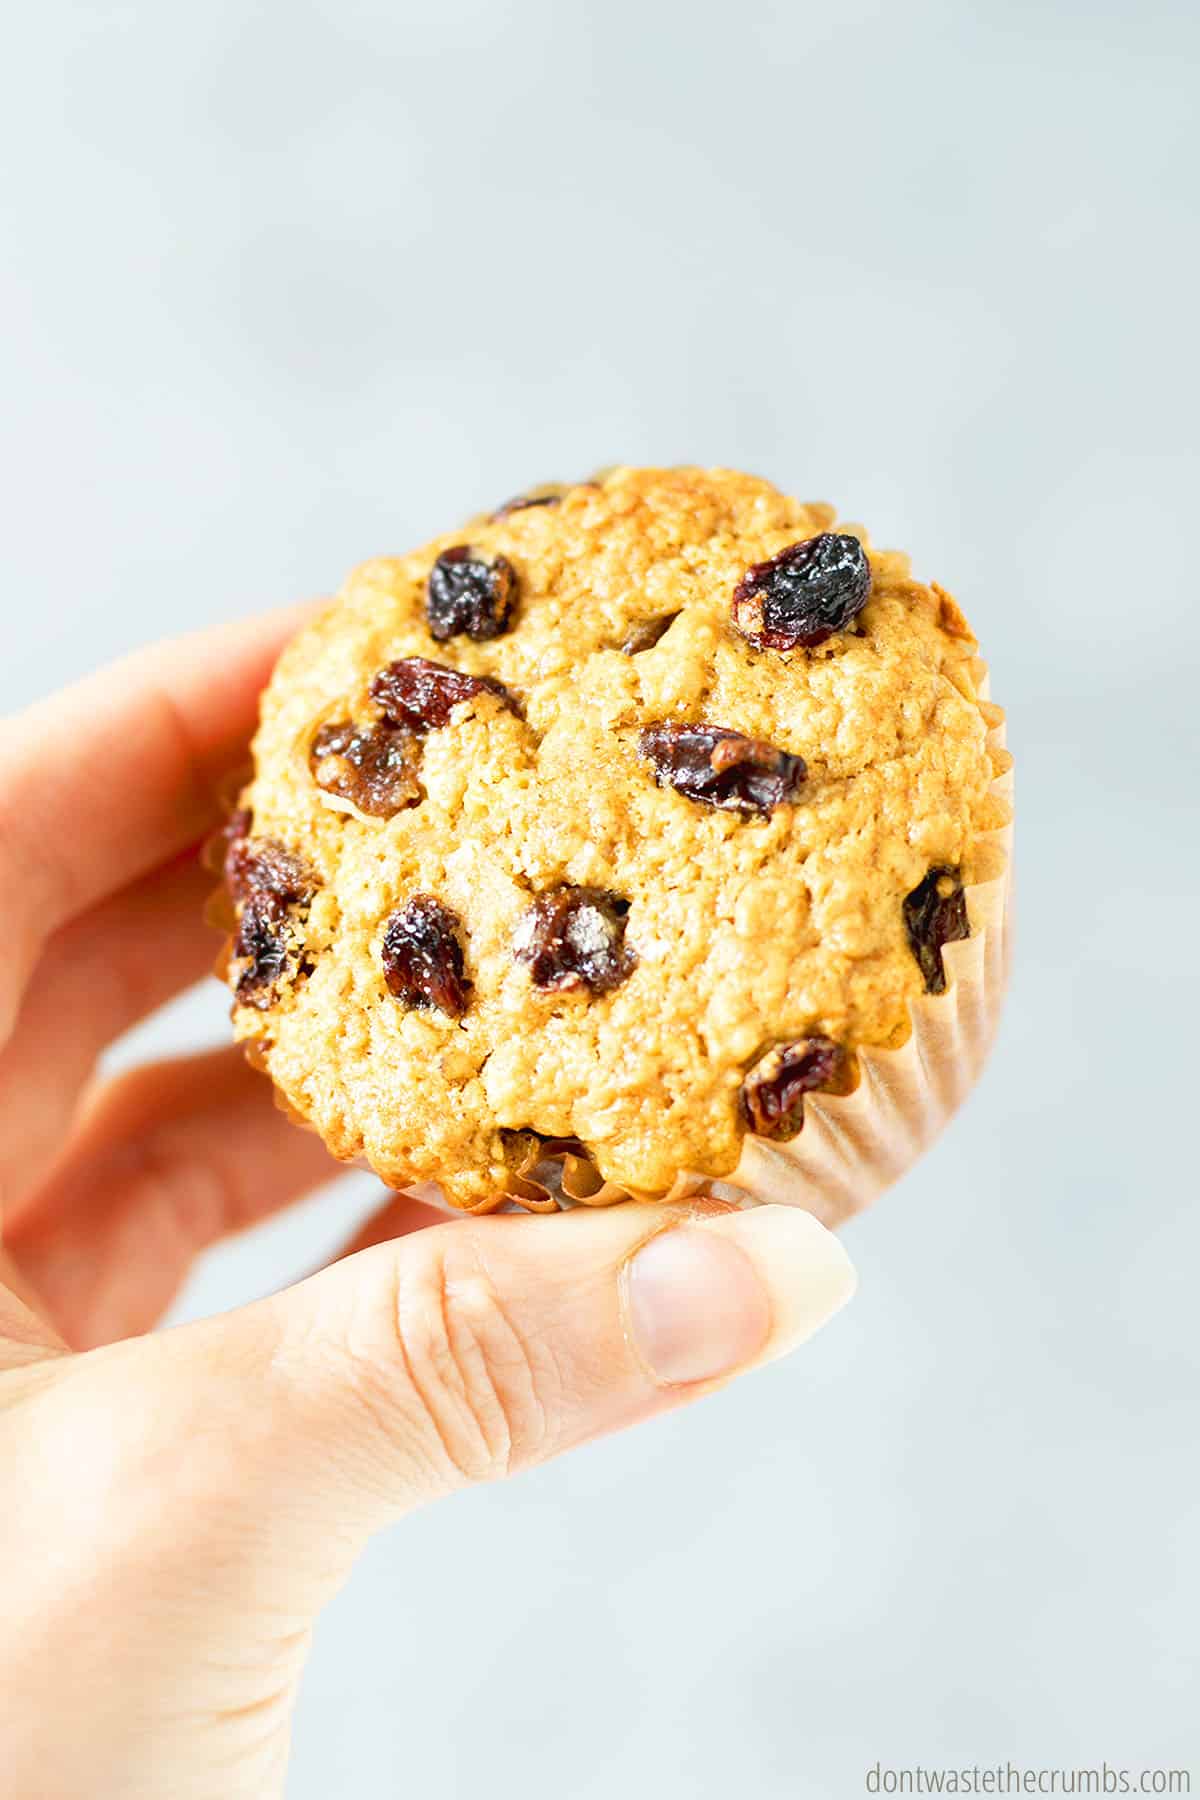 Hand holding buttermilk oatmeal muffin topped with raisins